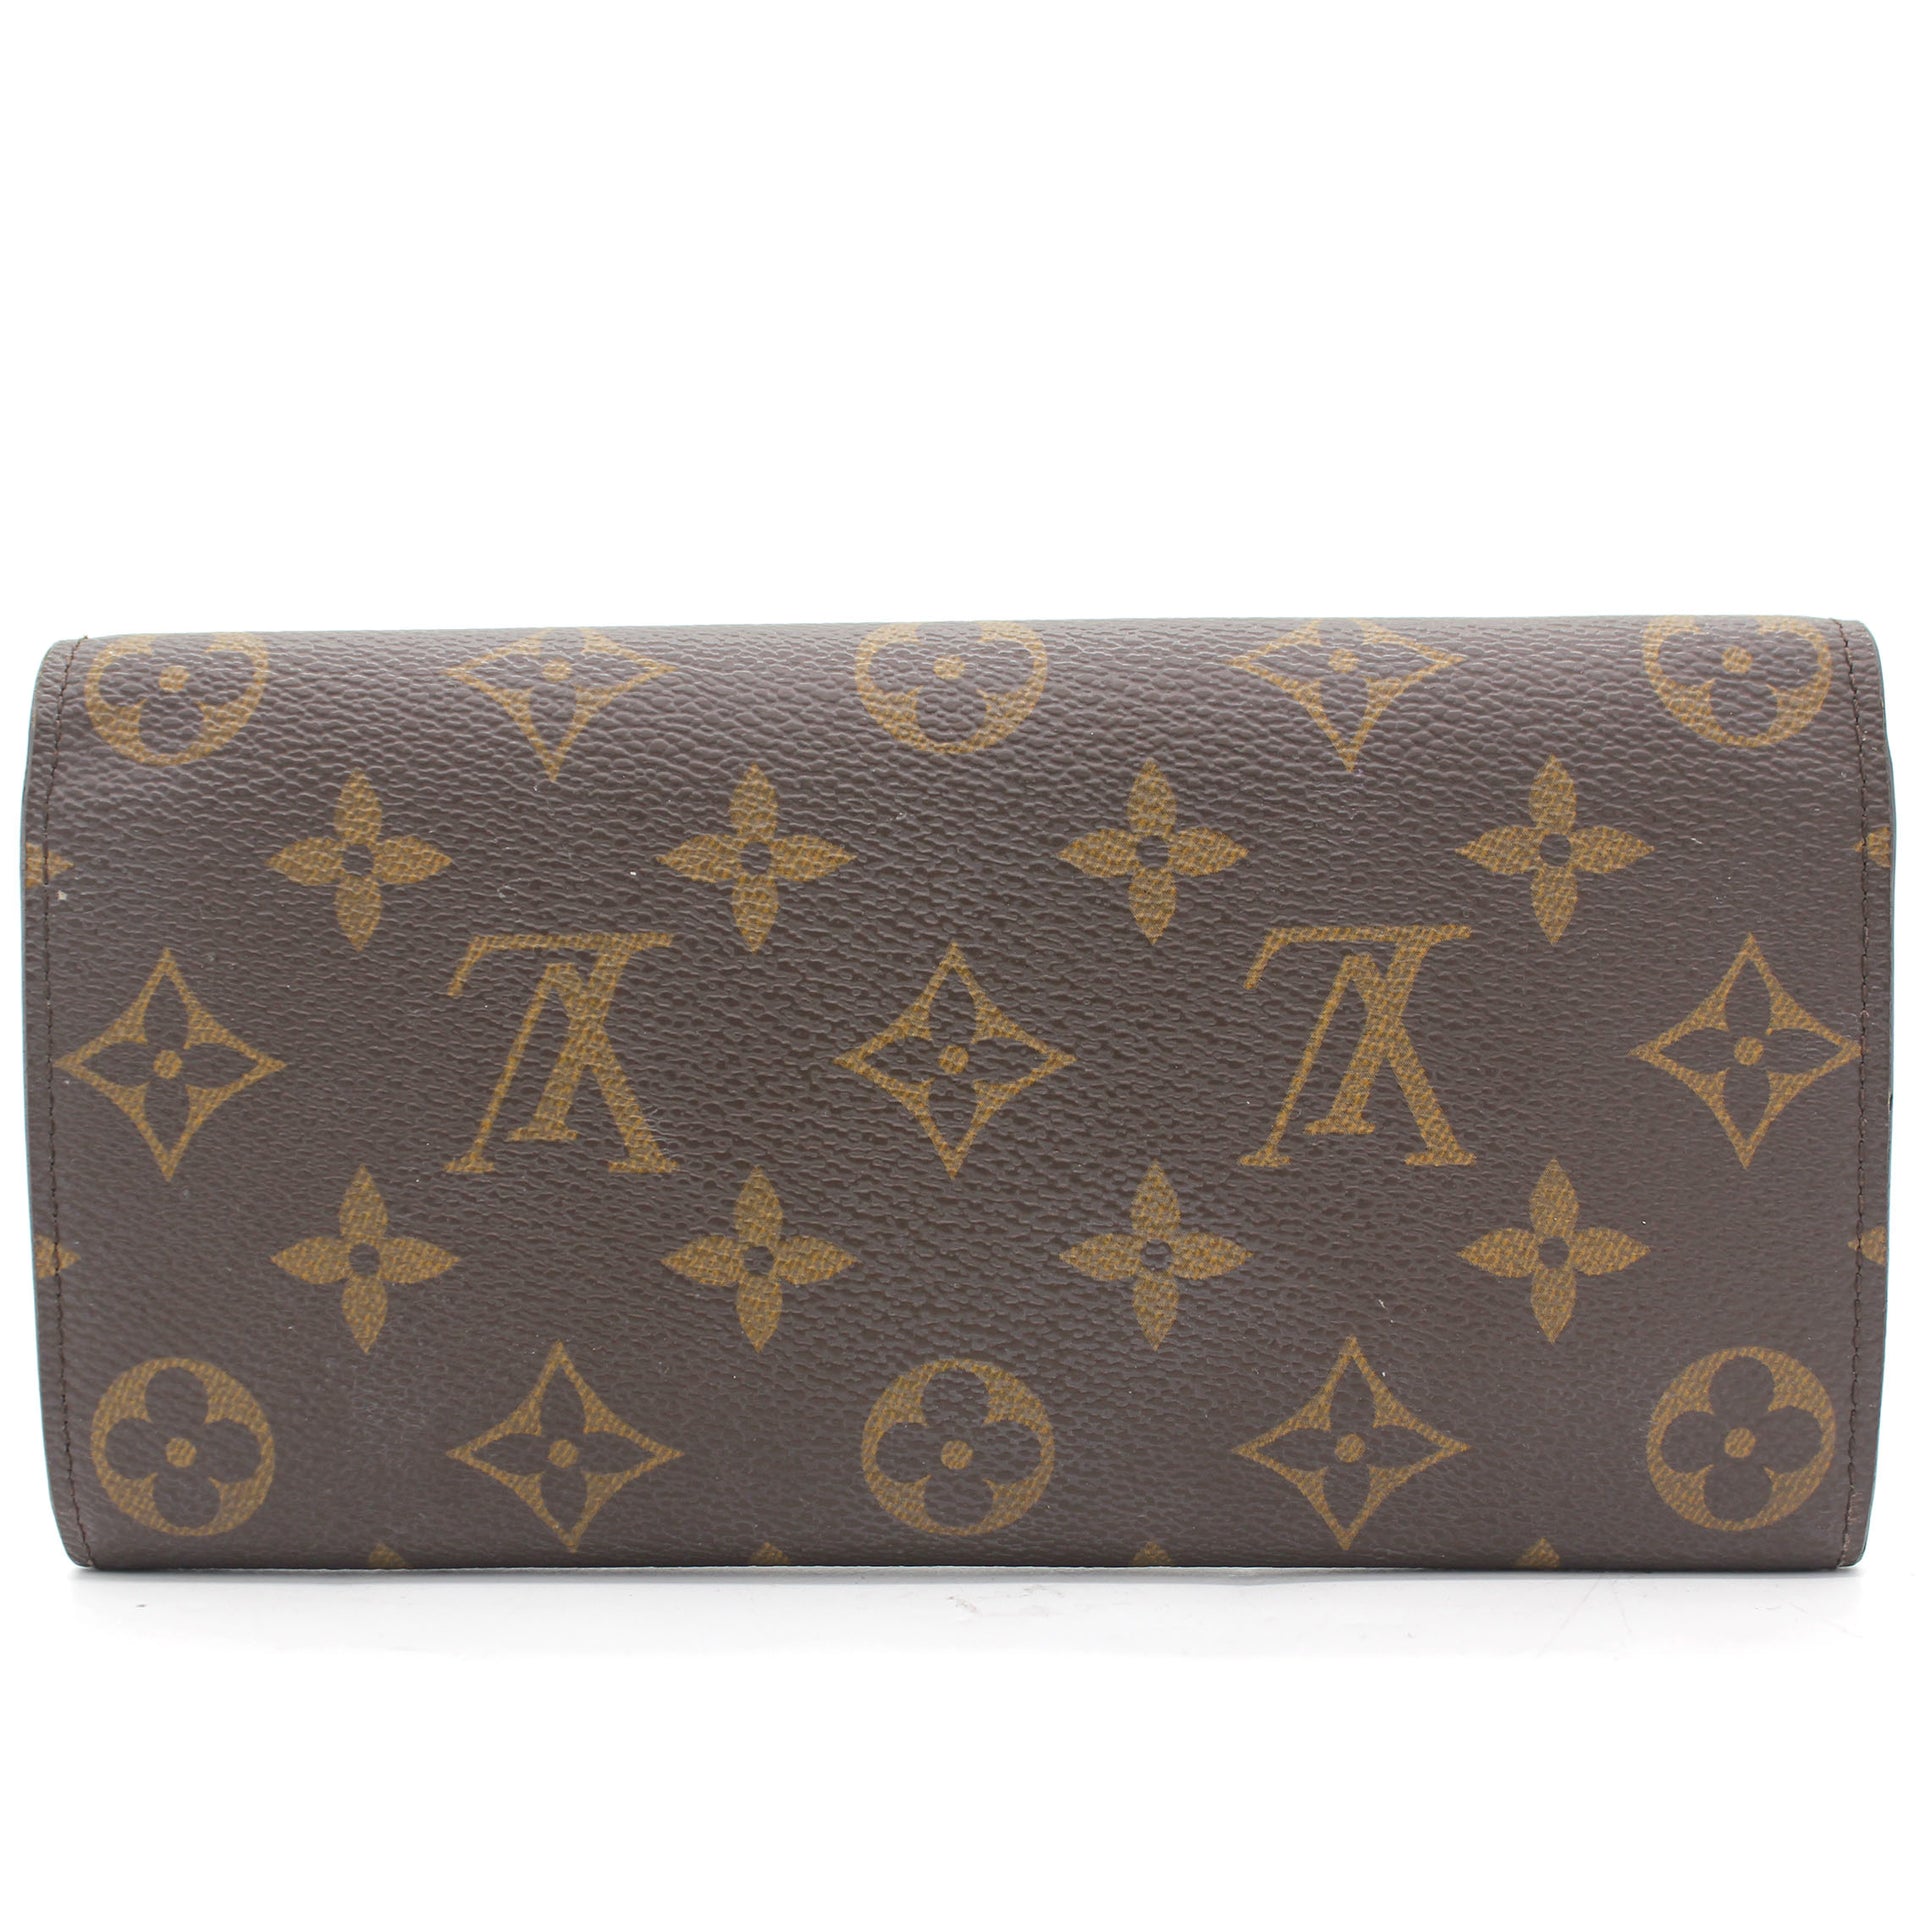 Louis Vuitton Emilie Wallet in Rose Ballerina Colour and Monogram Material